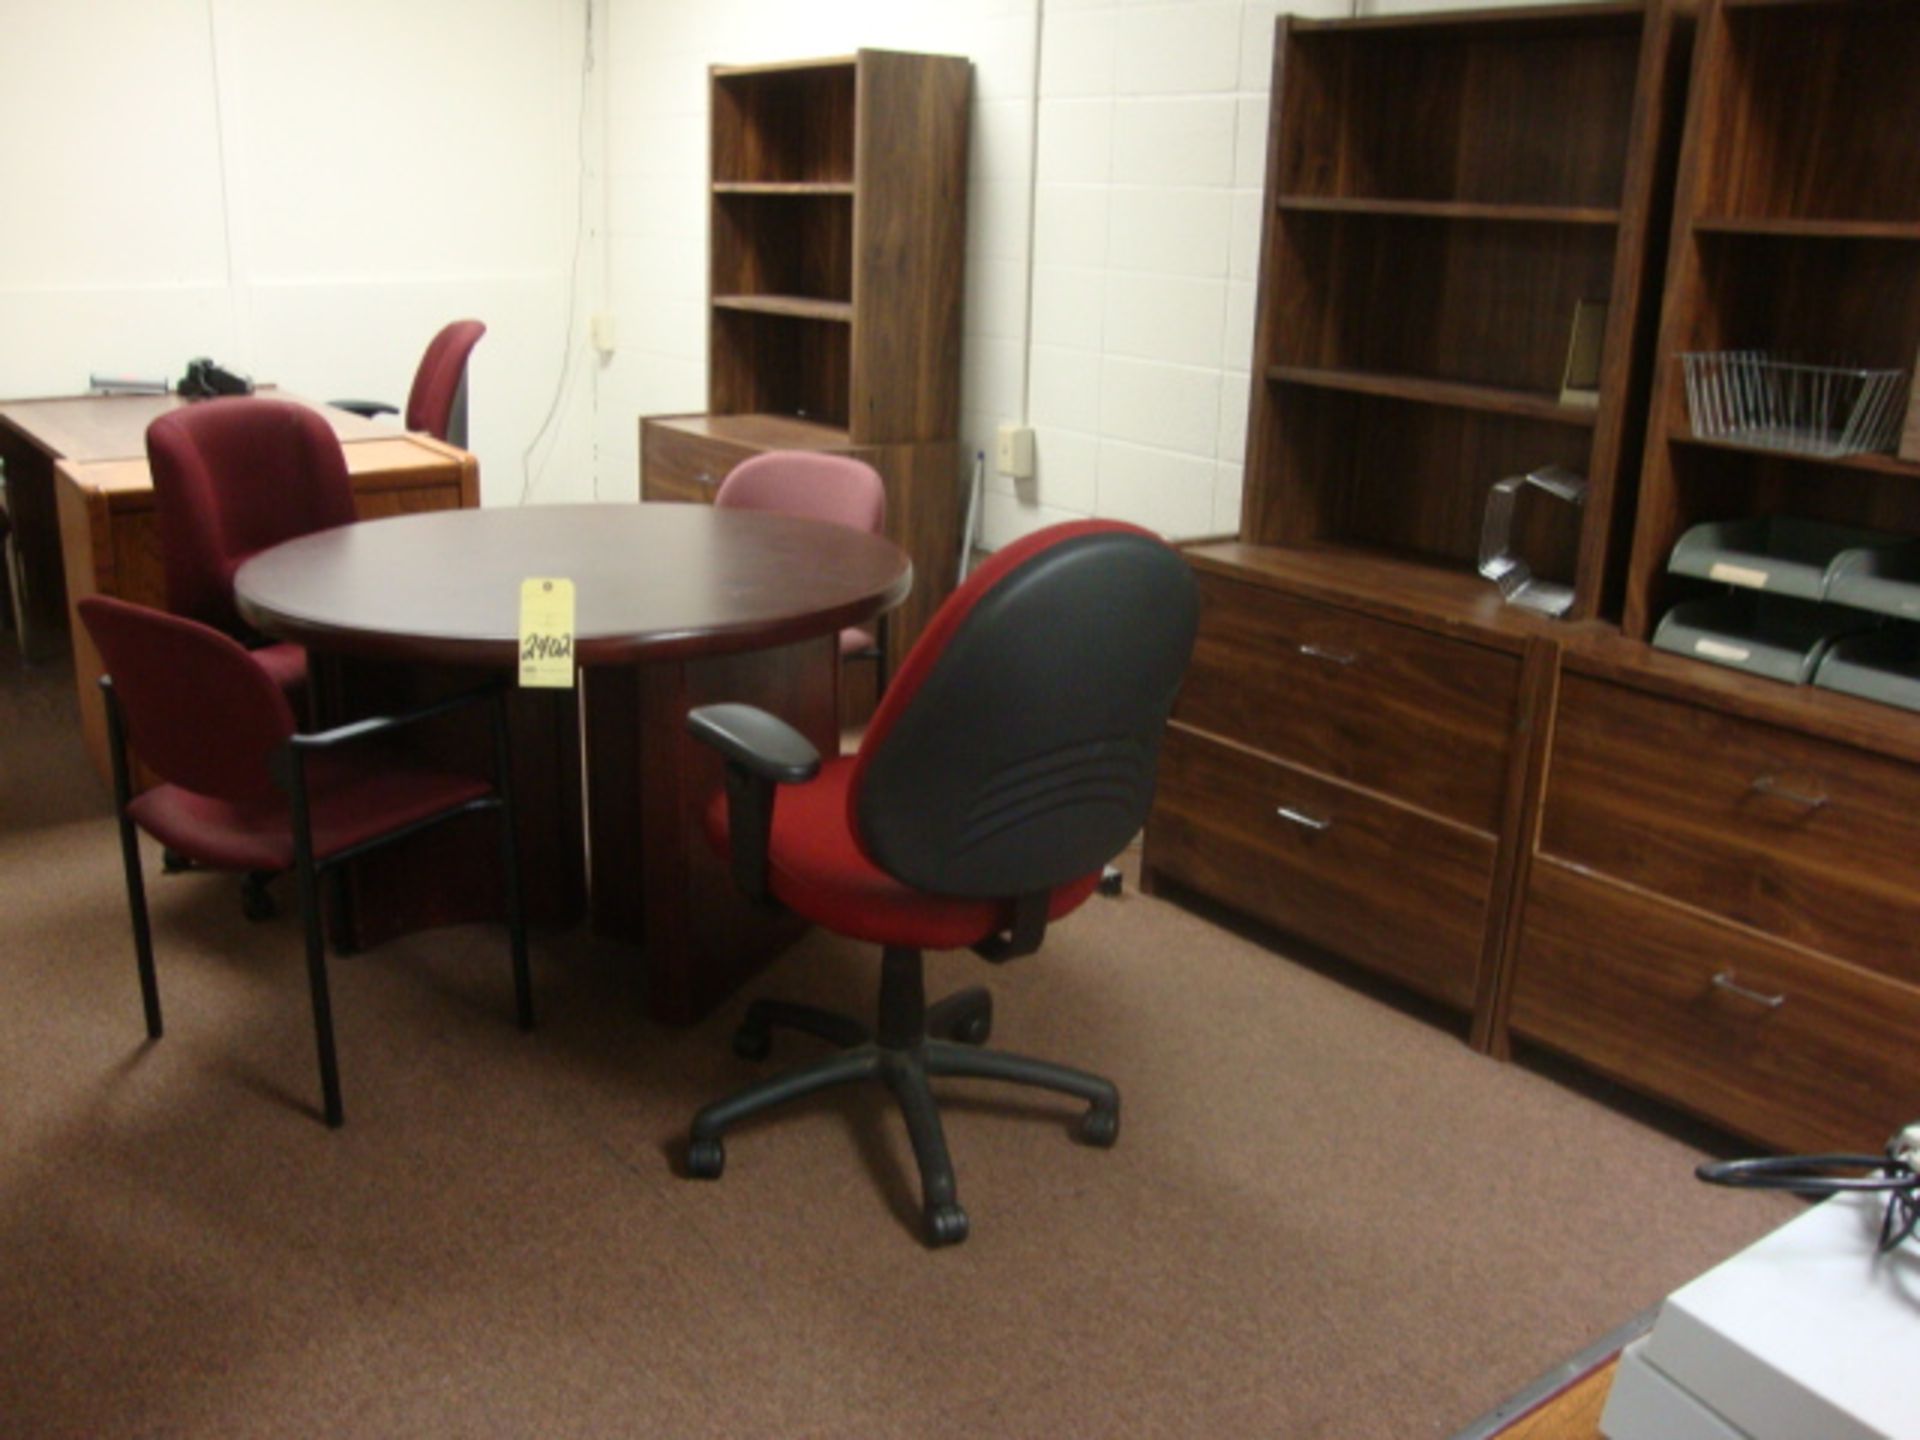 LOT OF OFFICE FURNITURE: desks, table, lateral file cabinets, chairs